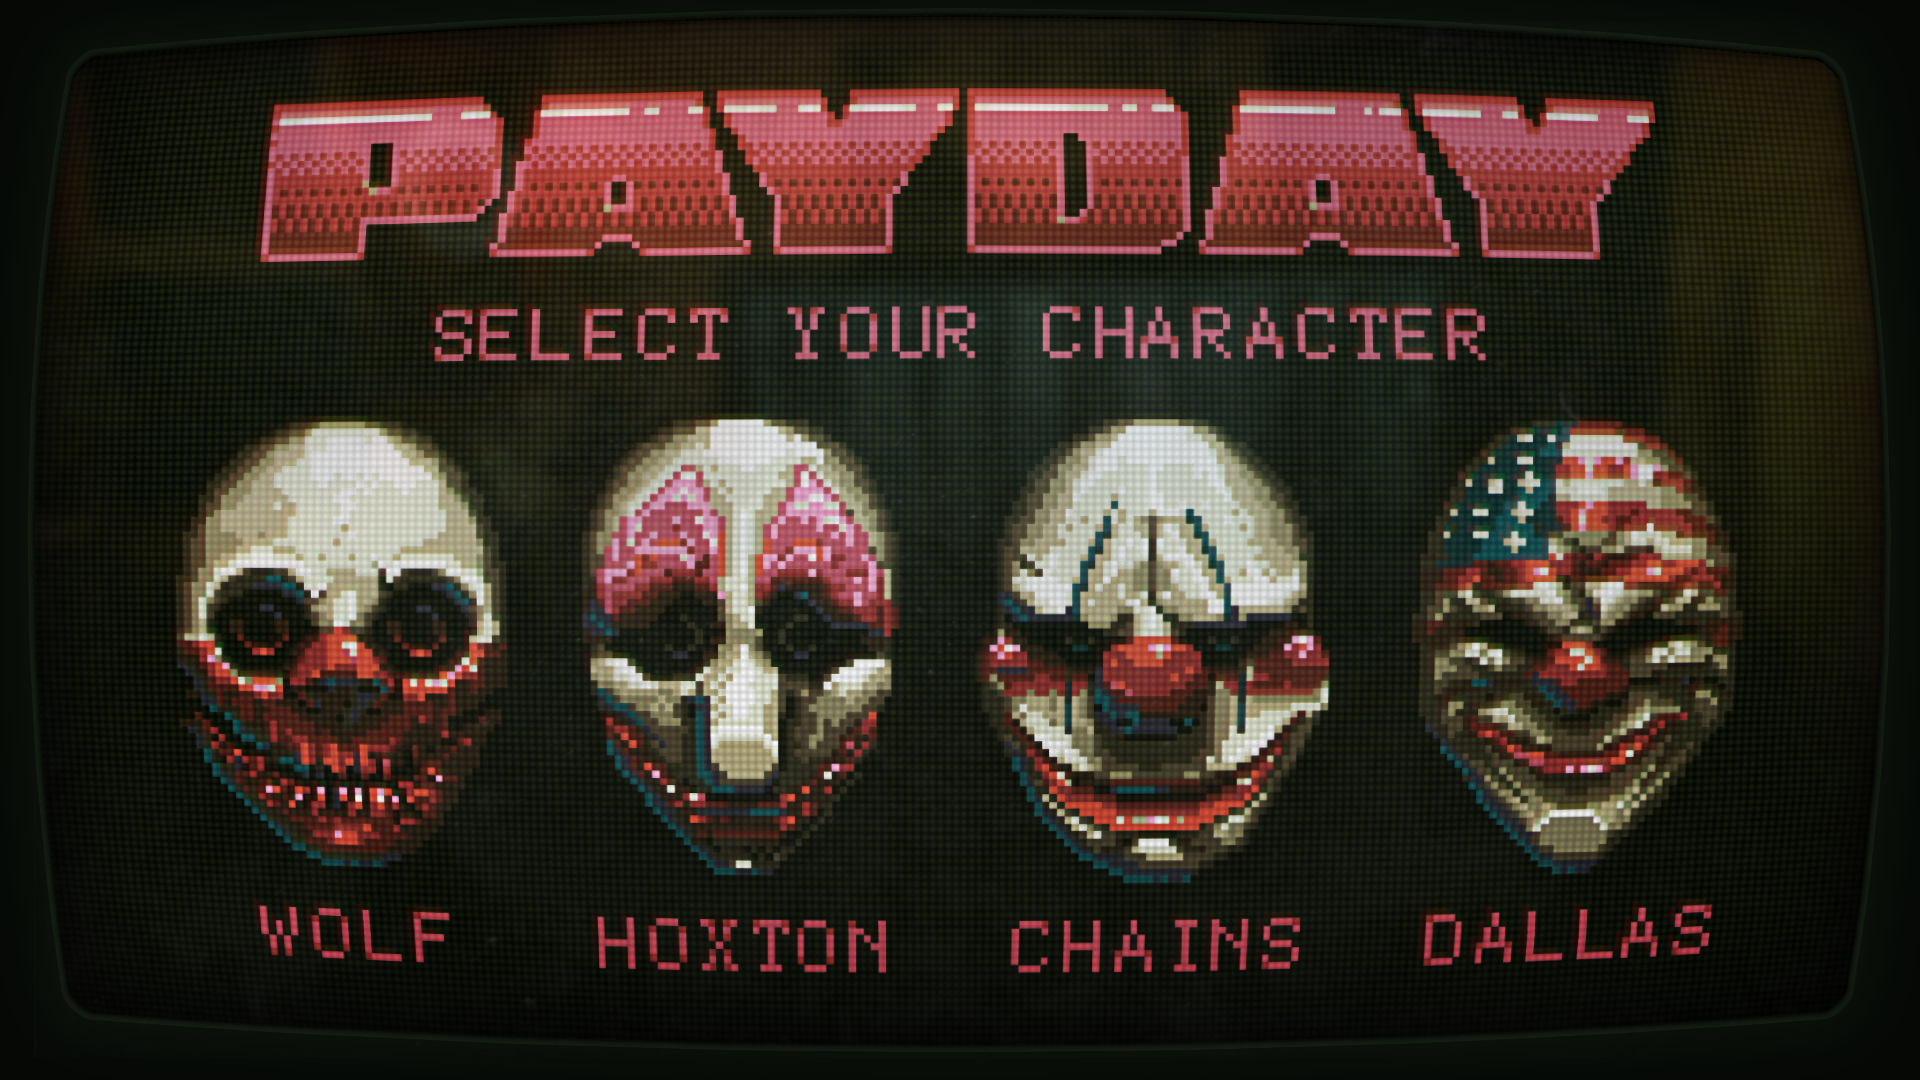 Chains Payday Dallas Payday Hoxton Payday Payday Payday 2 Pixel Art Wolf Payday 1920x1080